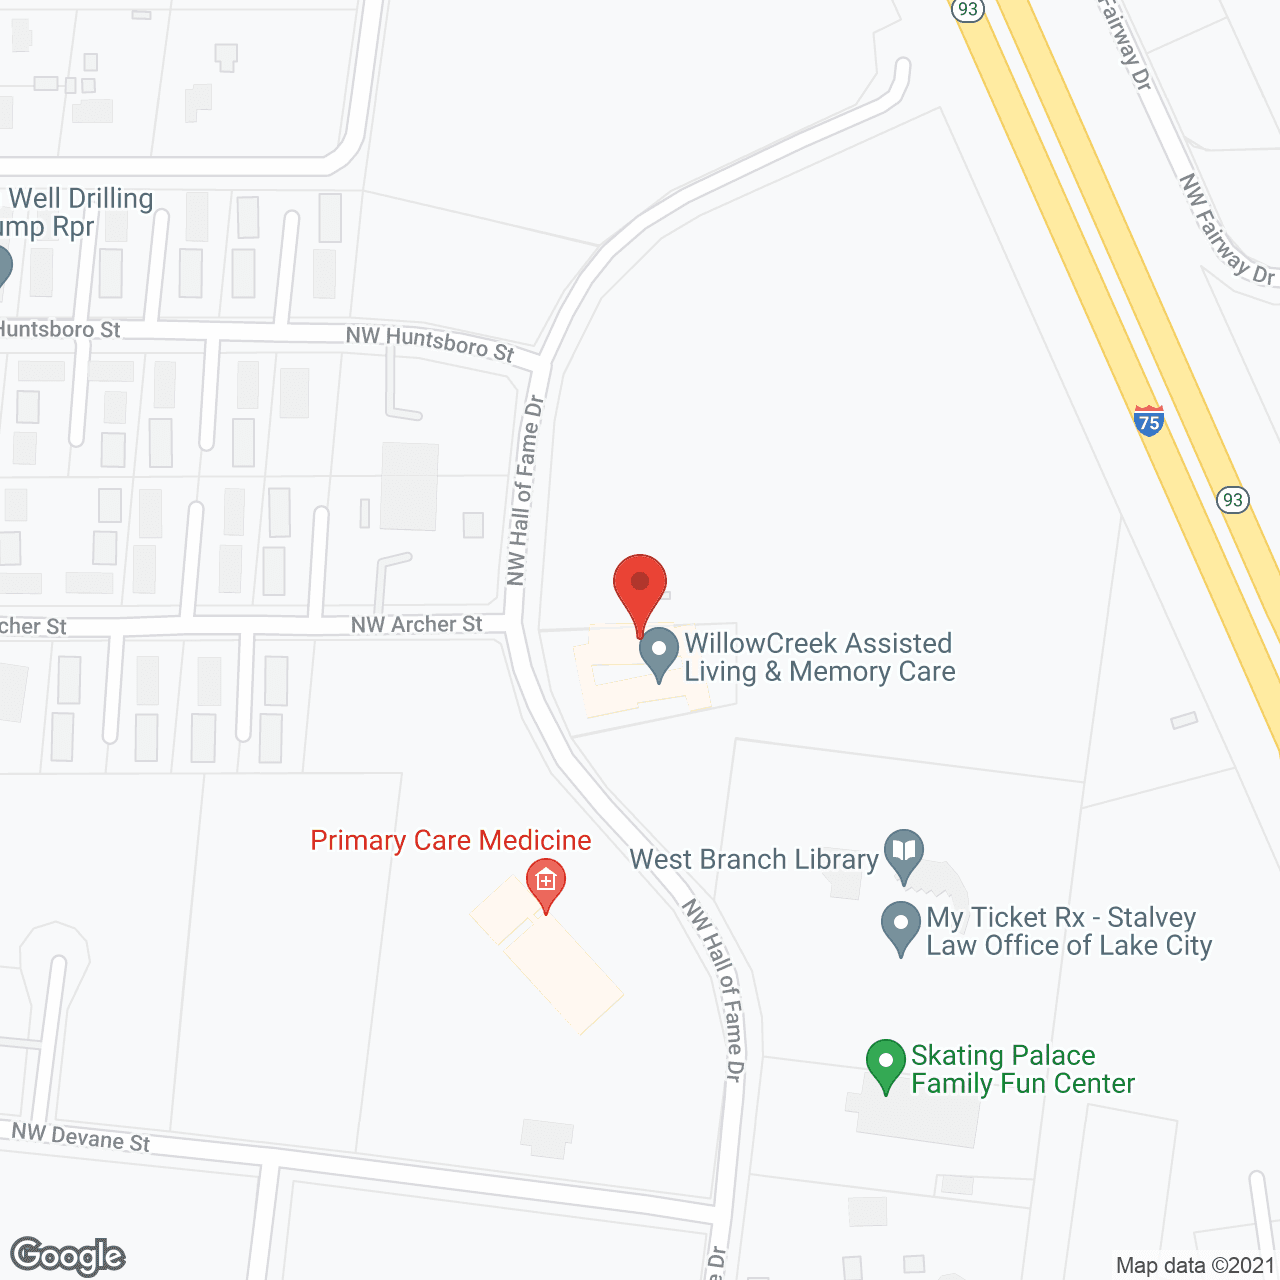 WillowCreek Assisted Living and Memory Care in google map